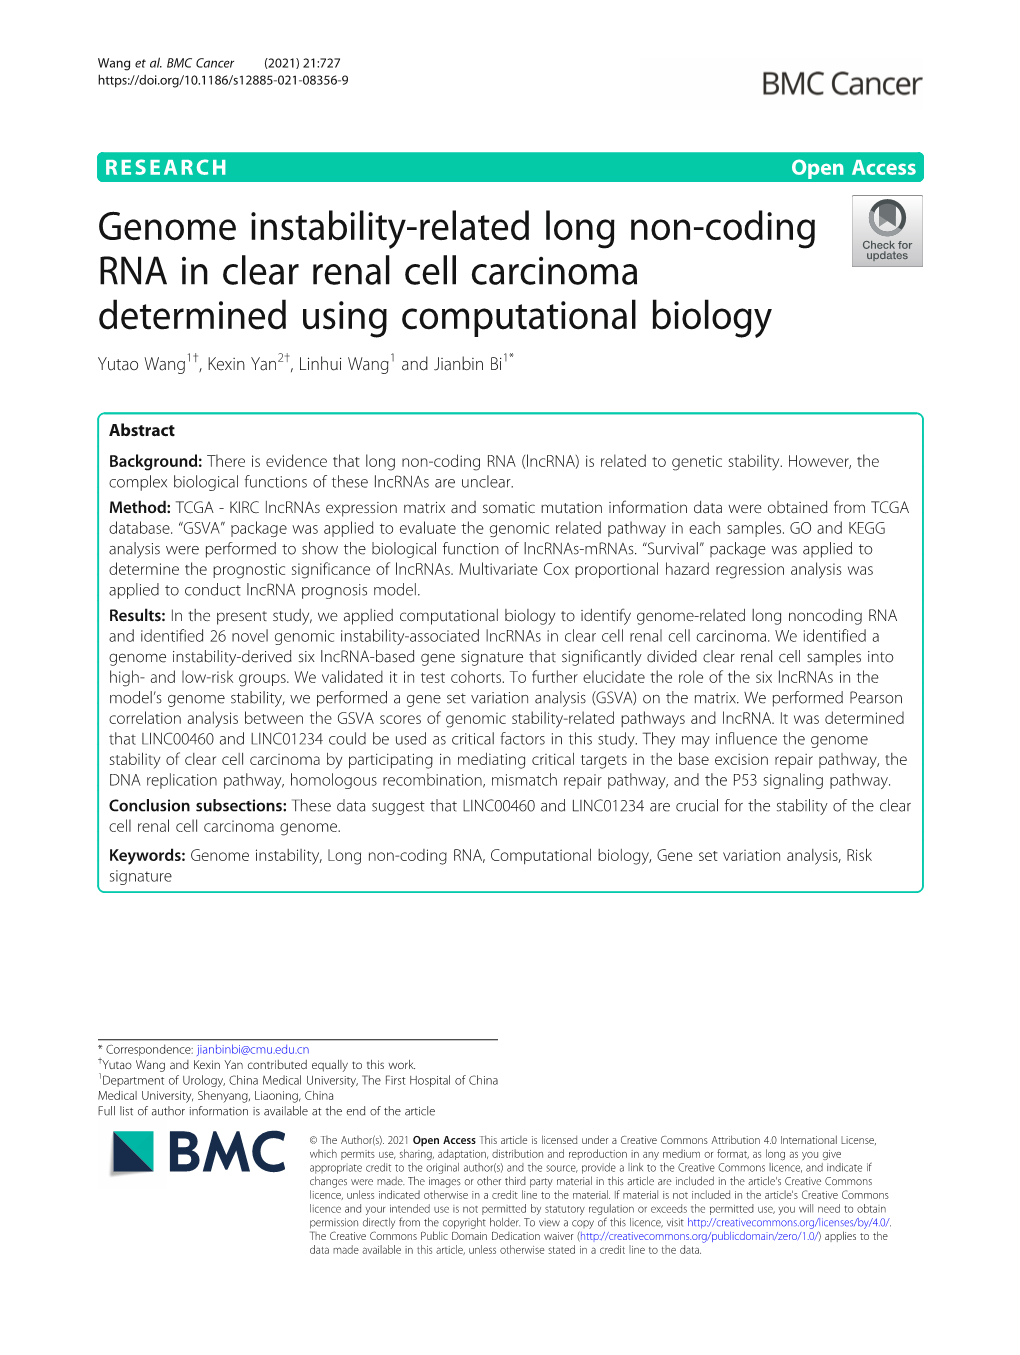 Genome Instability-Related Long Non-Coding RNA in Clear Renal Cell